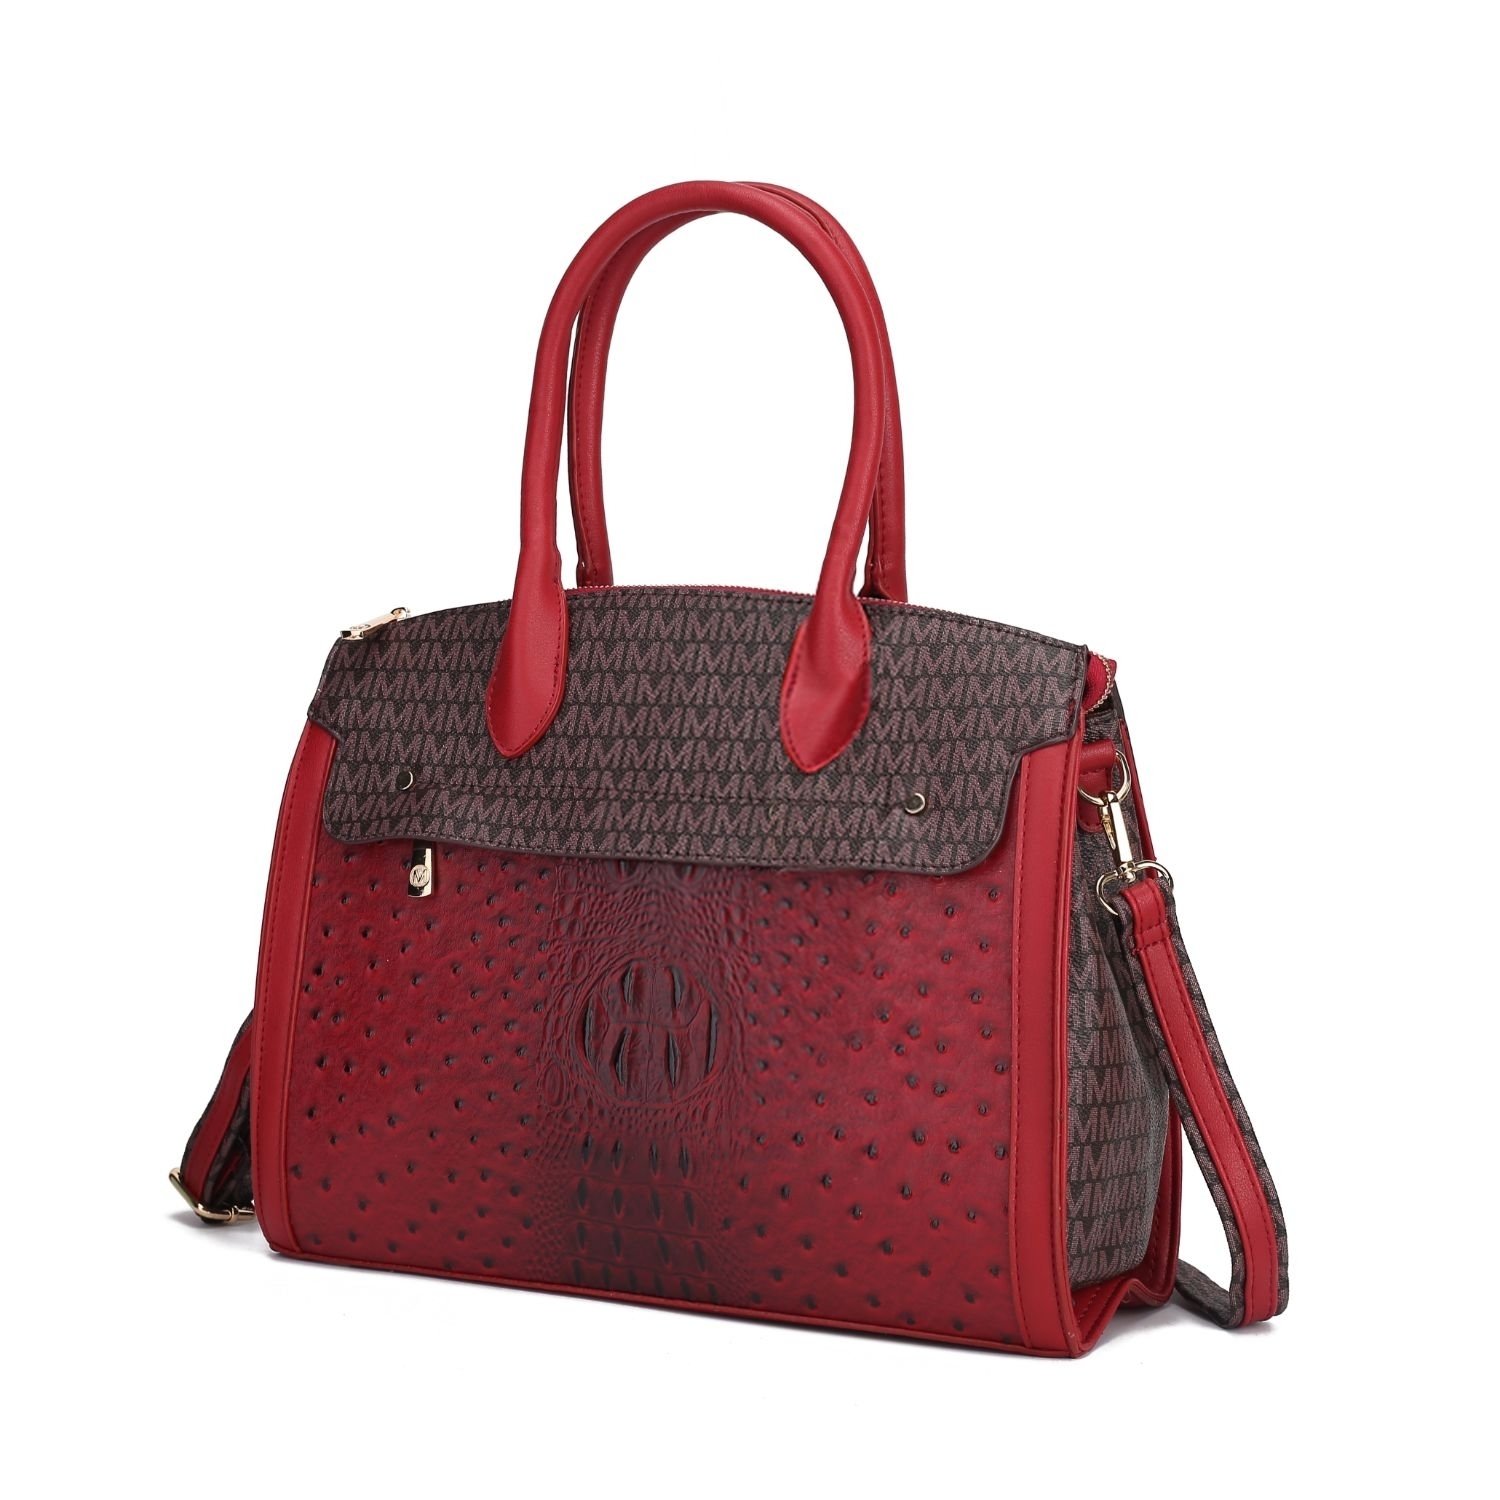 MKF Collection Reidy Tote Handbag By Mia K. - Red